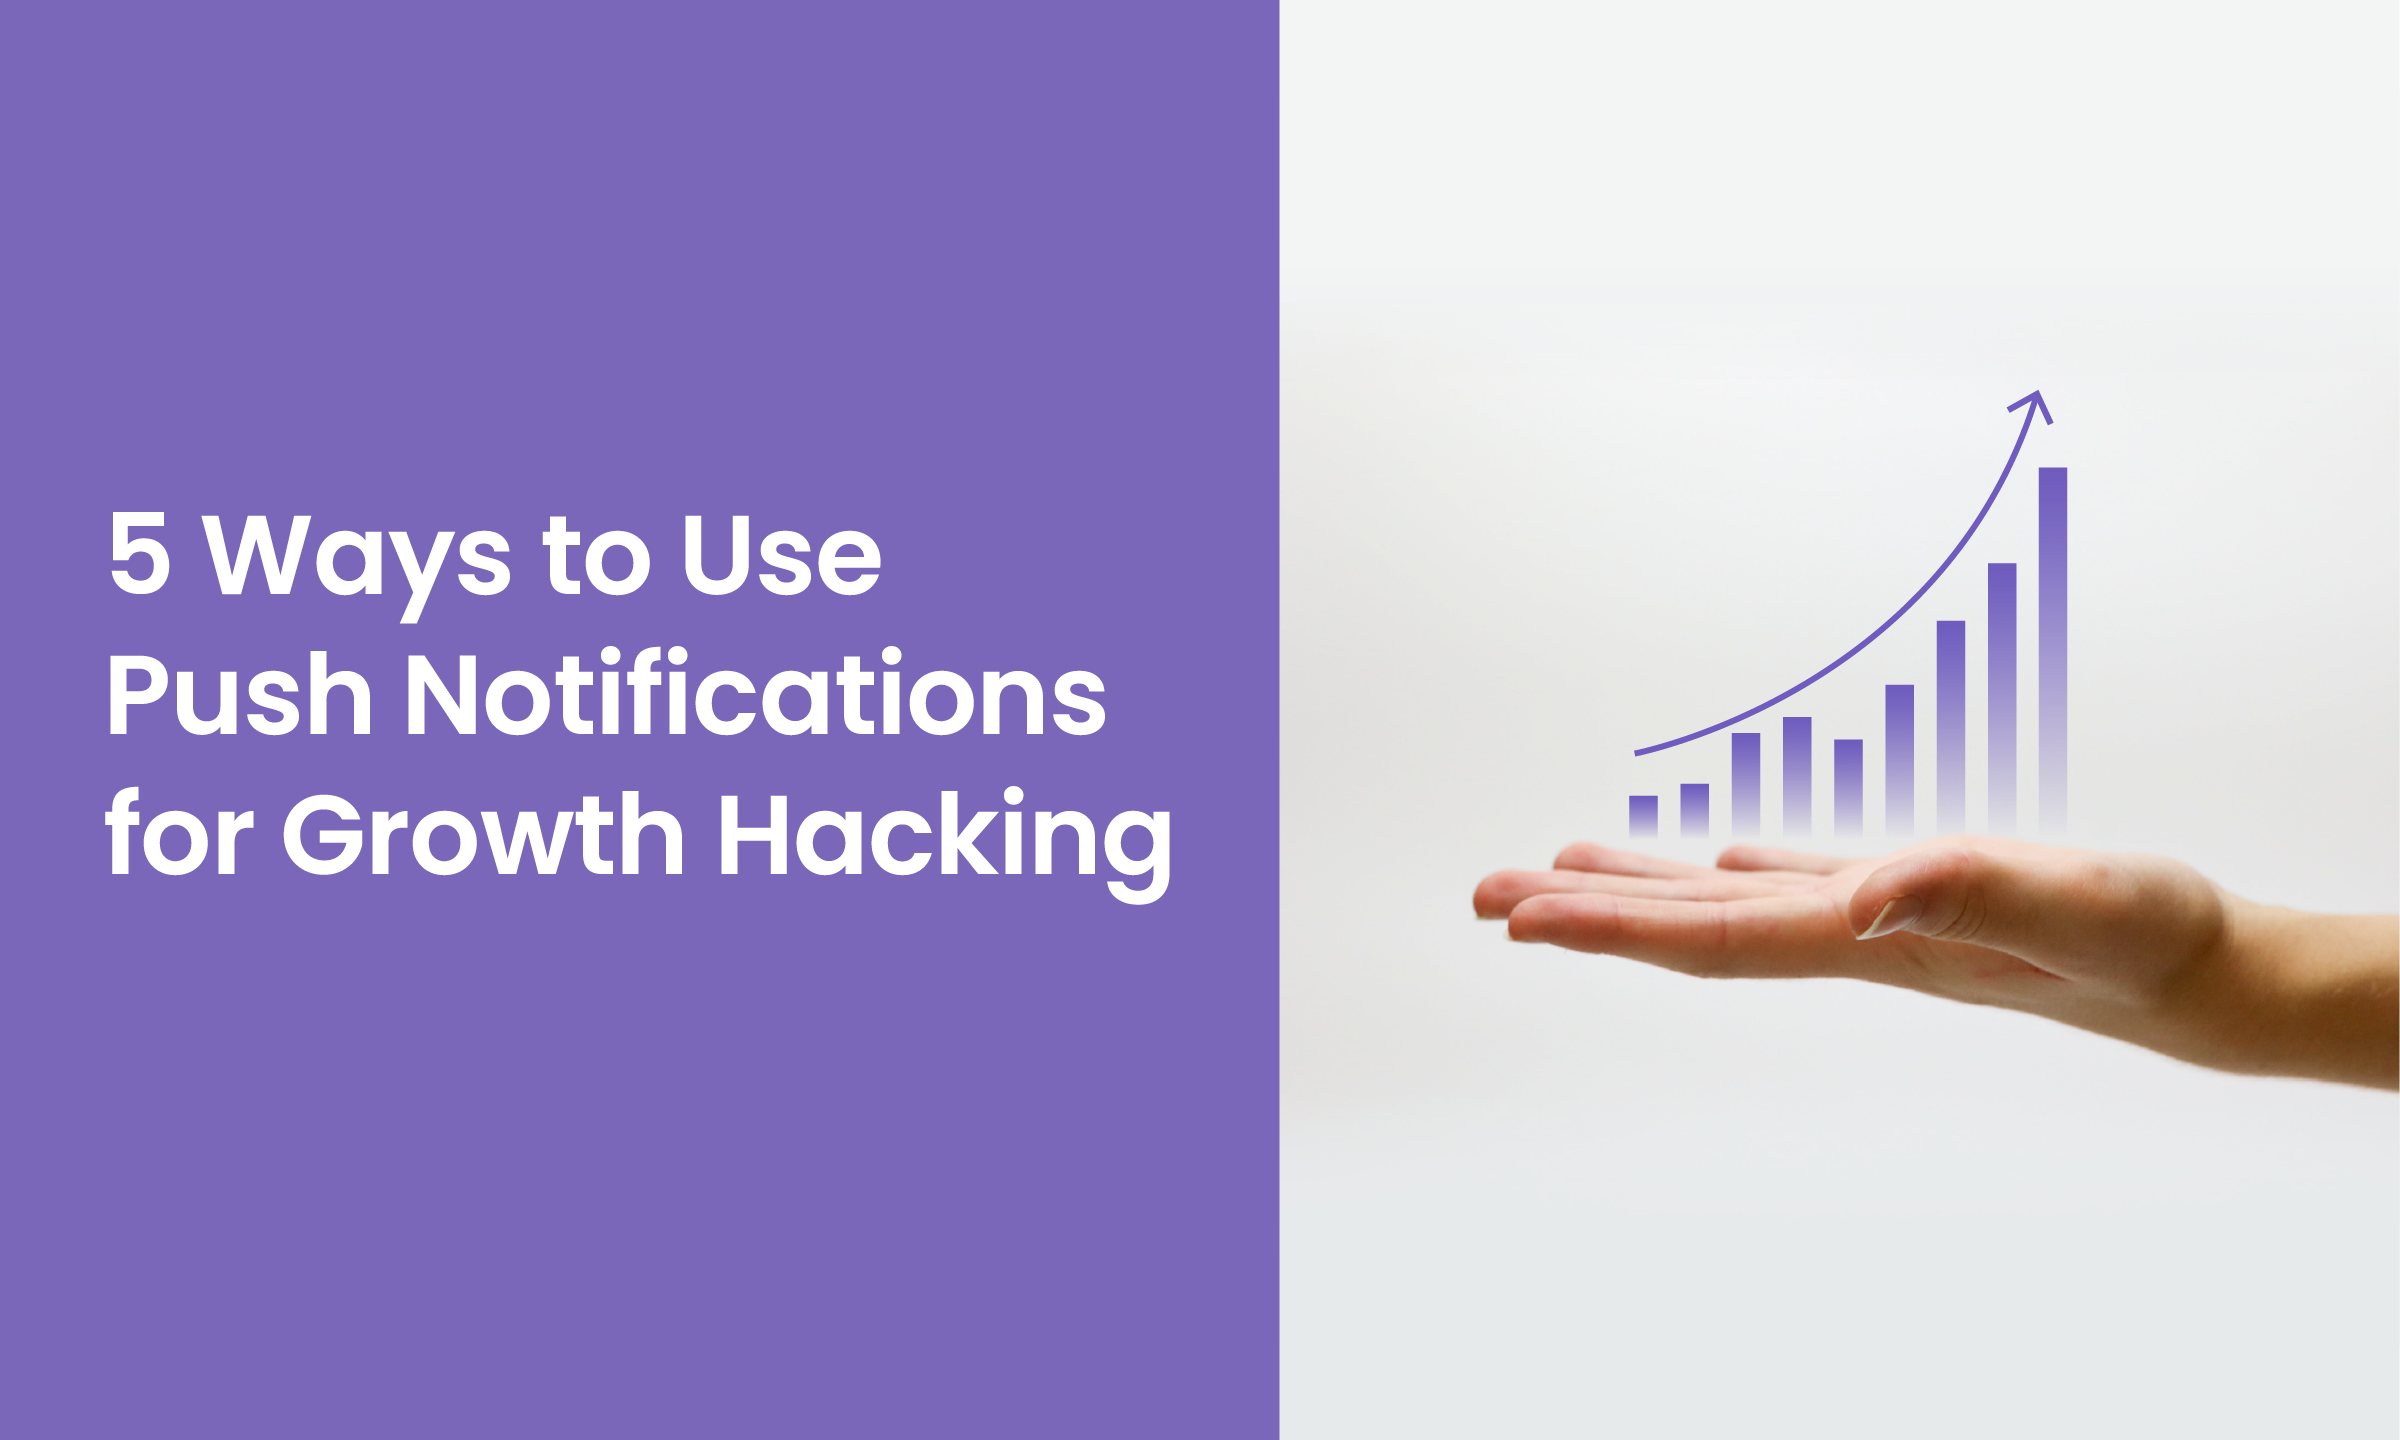 An image showing a chart and writing that reads "5 ways to use push notifications for growth hacking."